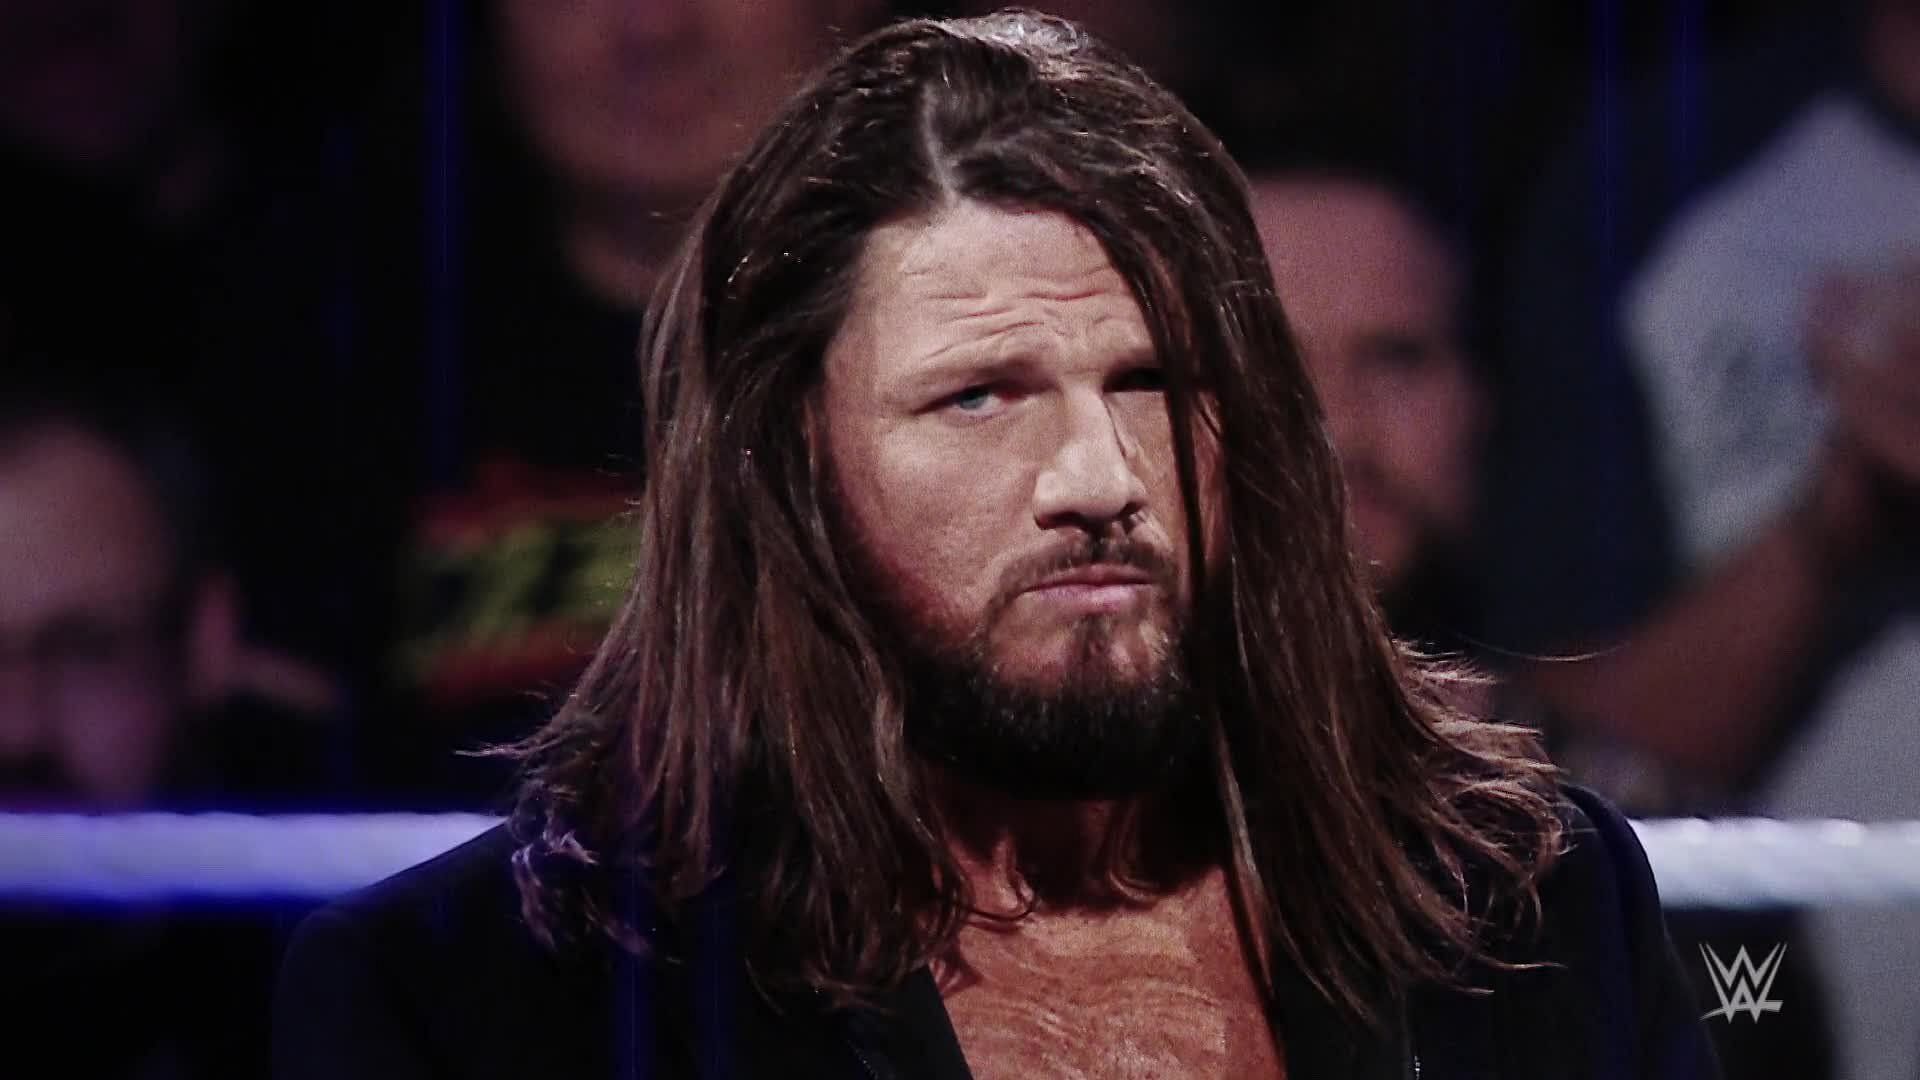 AJ Styles is disappointed by a former stablemate